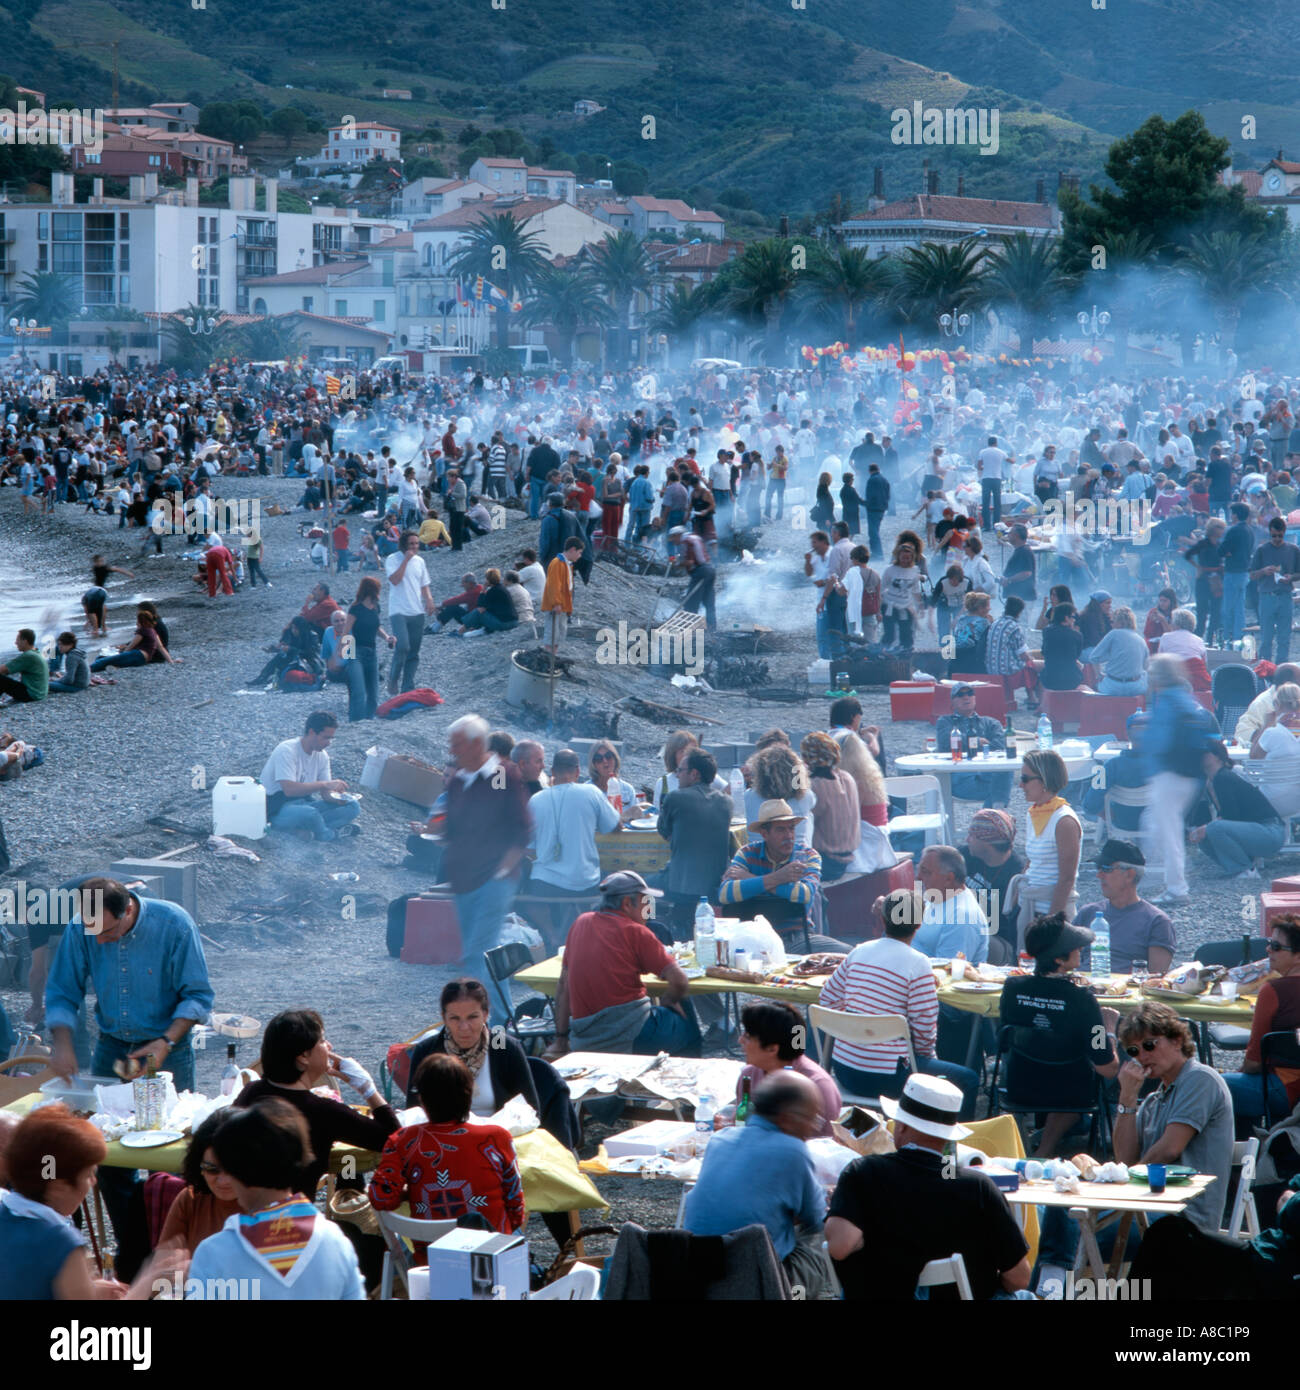 Barbecue on beach at Fete des Vendanges Banyuls-sur-Mer Pyrenees-Orientals Languedoc-Roussillion France Stock Photo